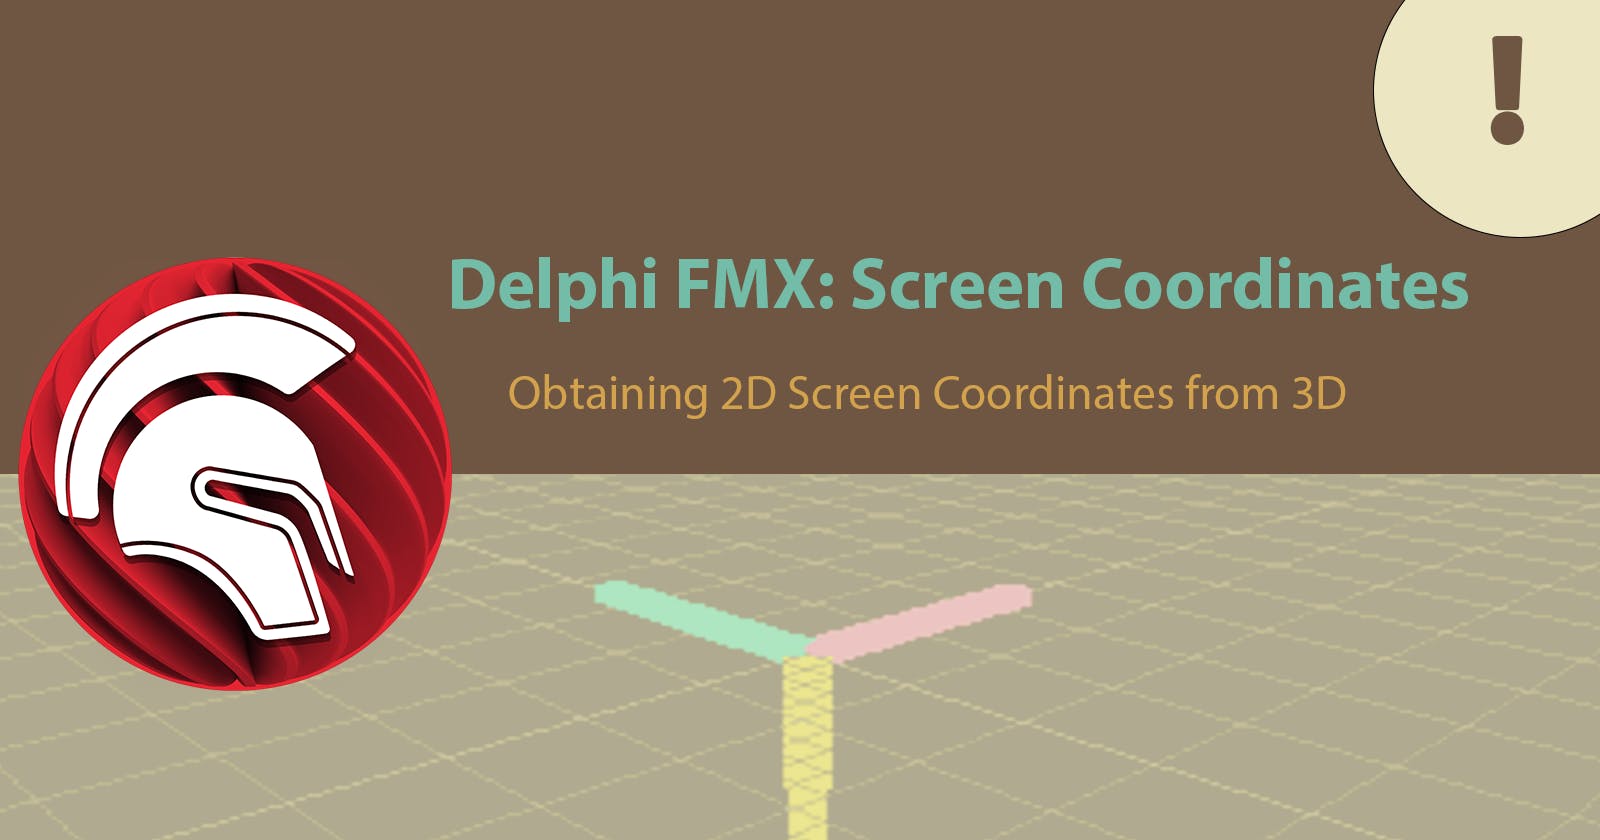 How To: Get Screen Coordinates From 3D in Delphi